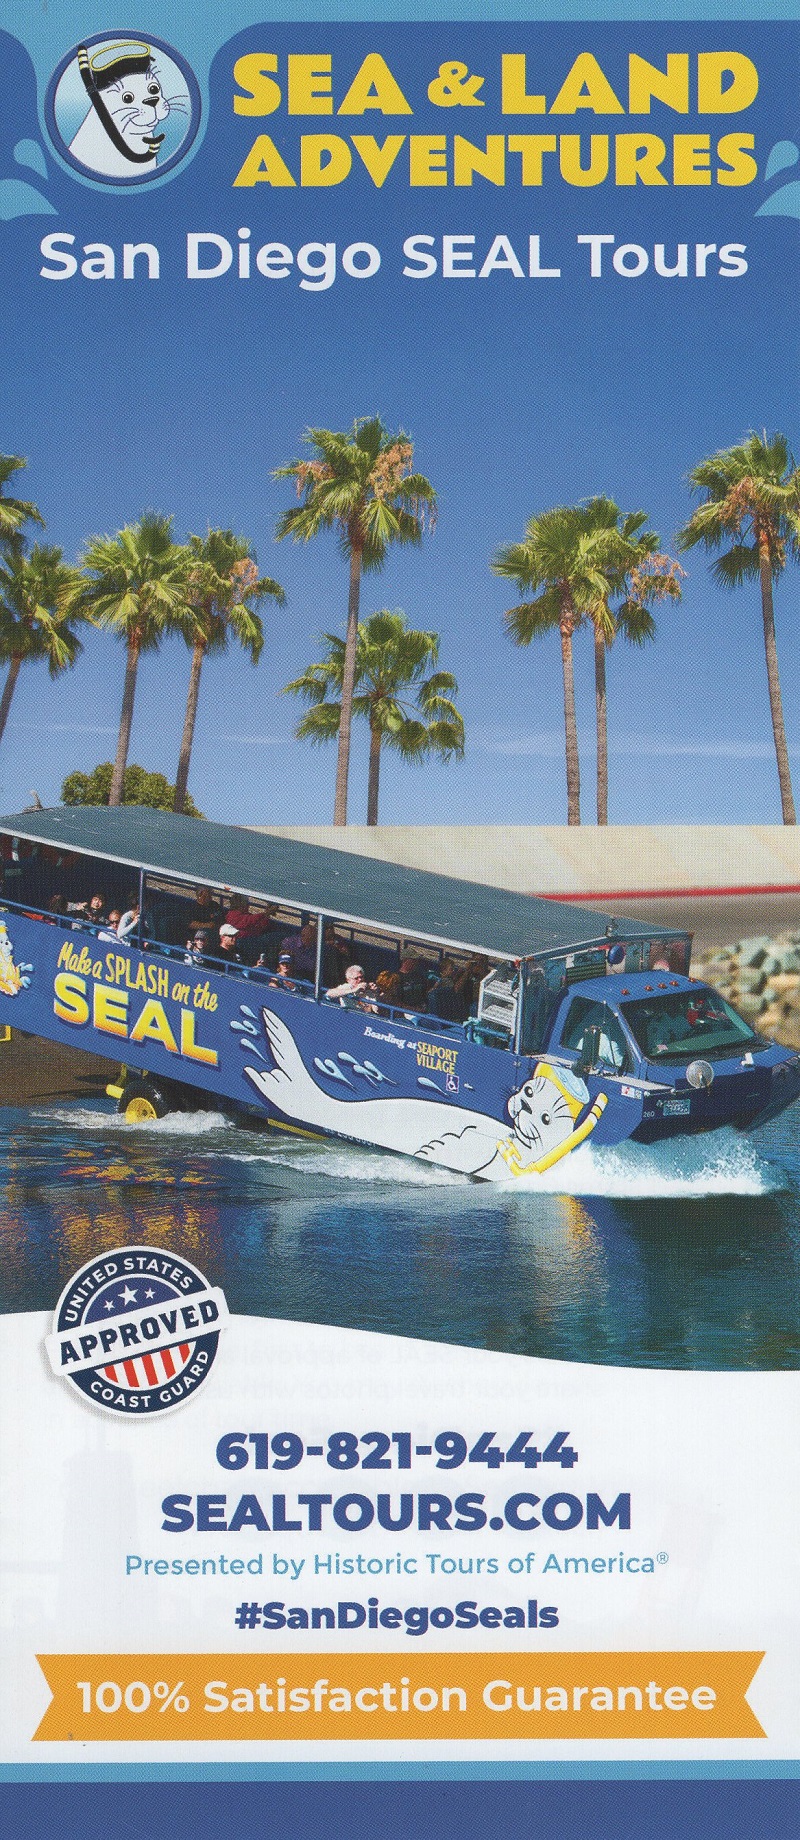 Seal Tours brochure full size